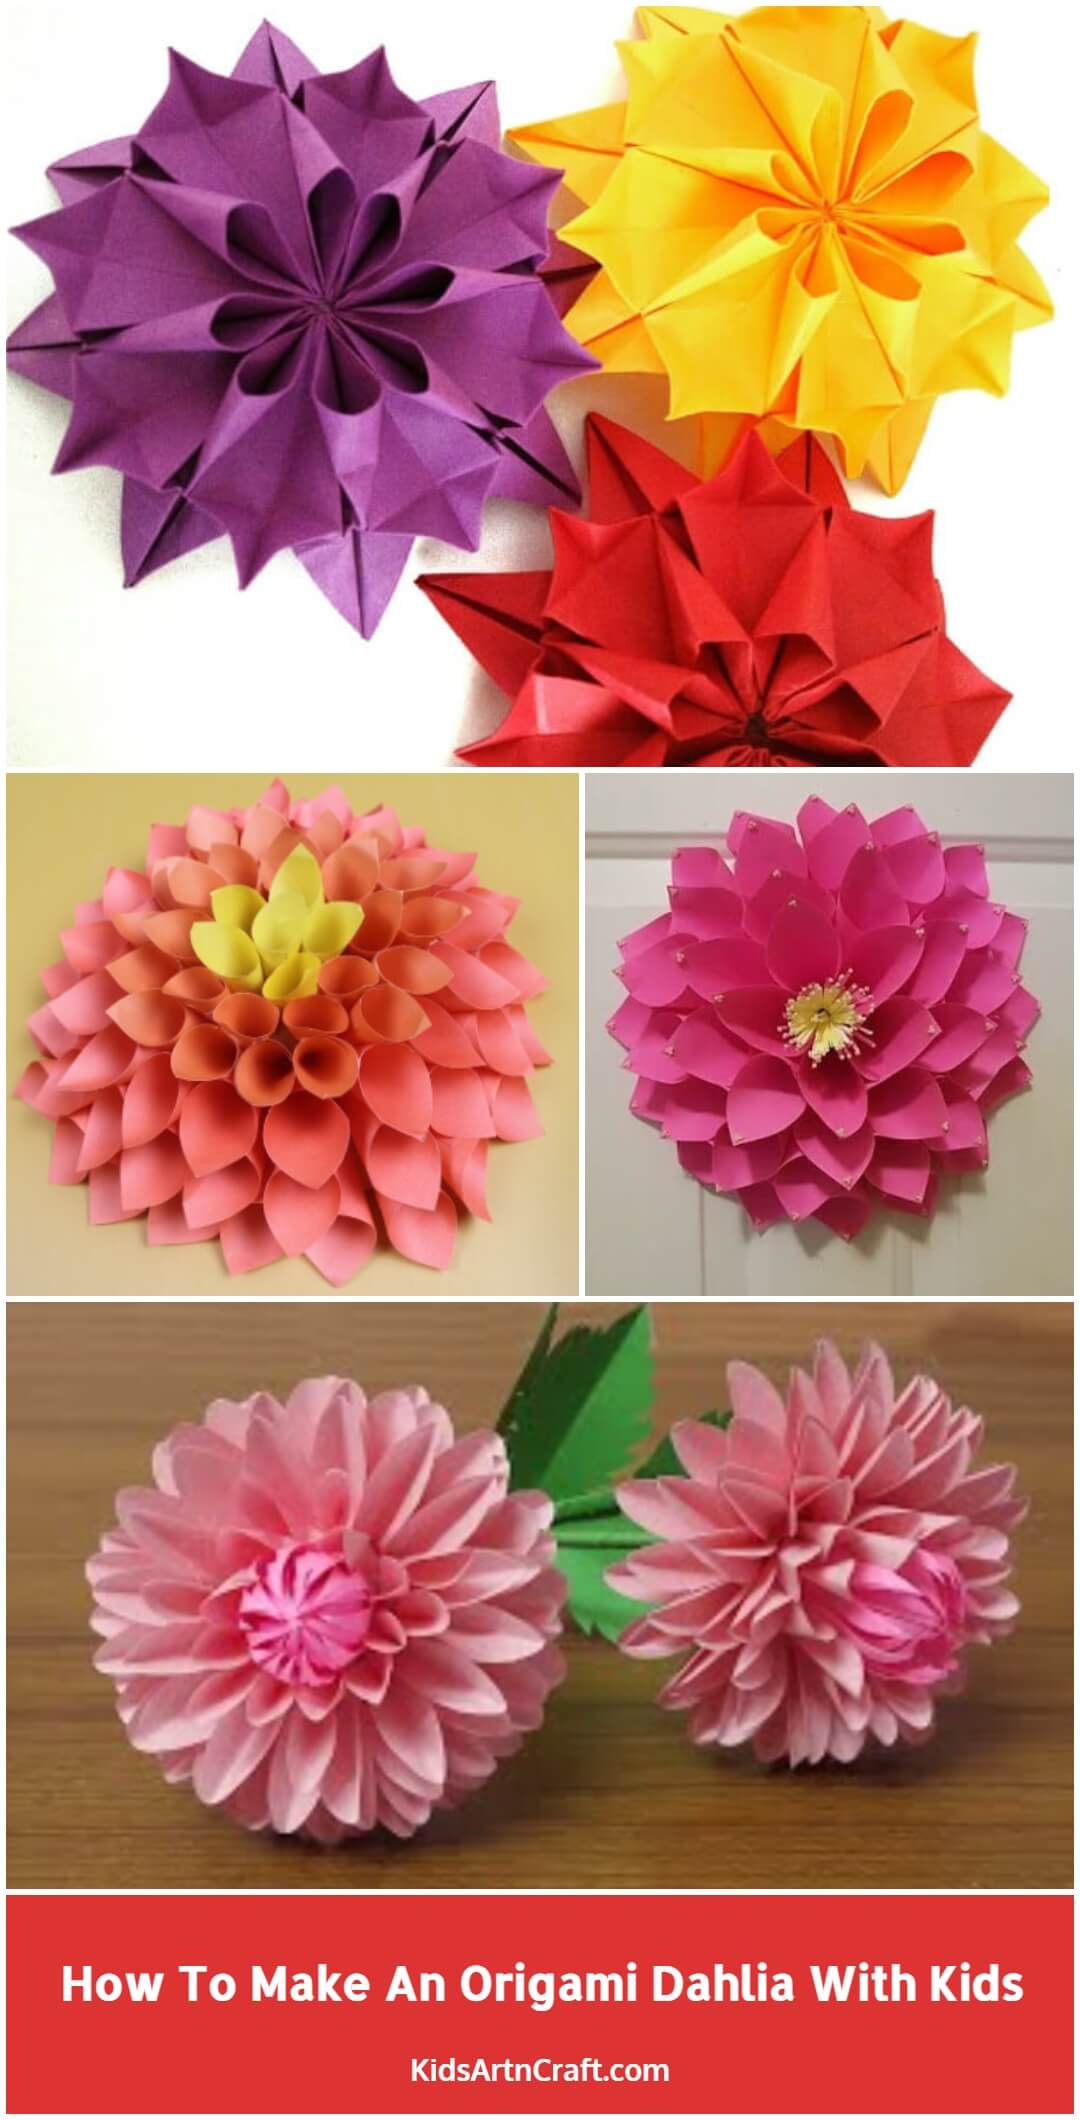 How To Make An Origami Dahlia With Kids